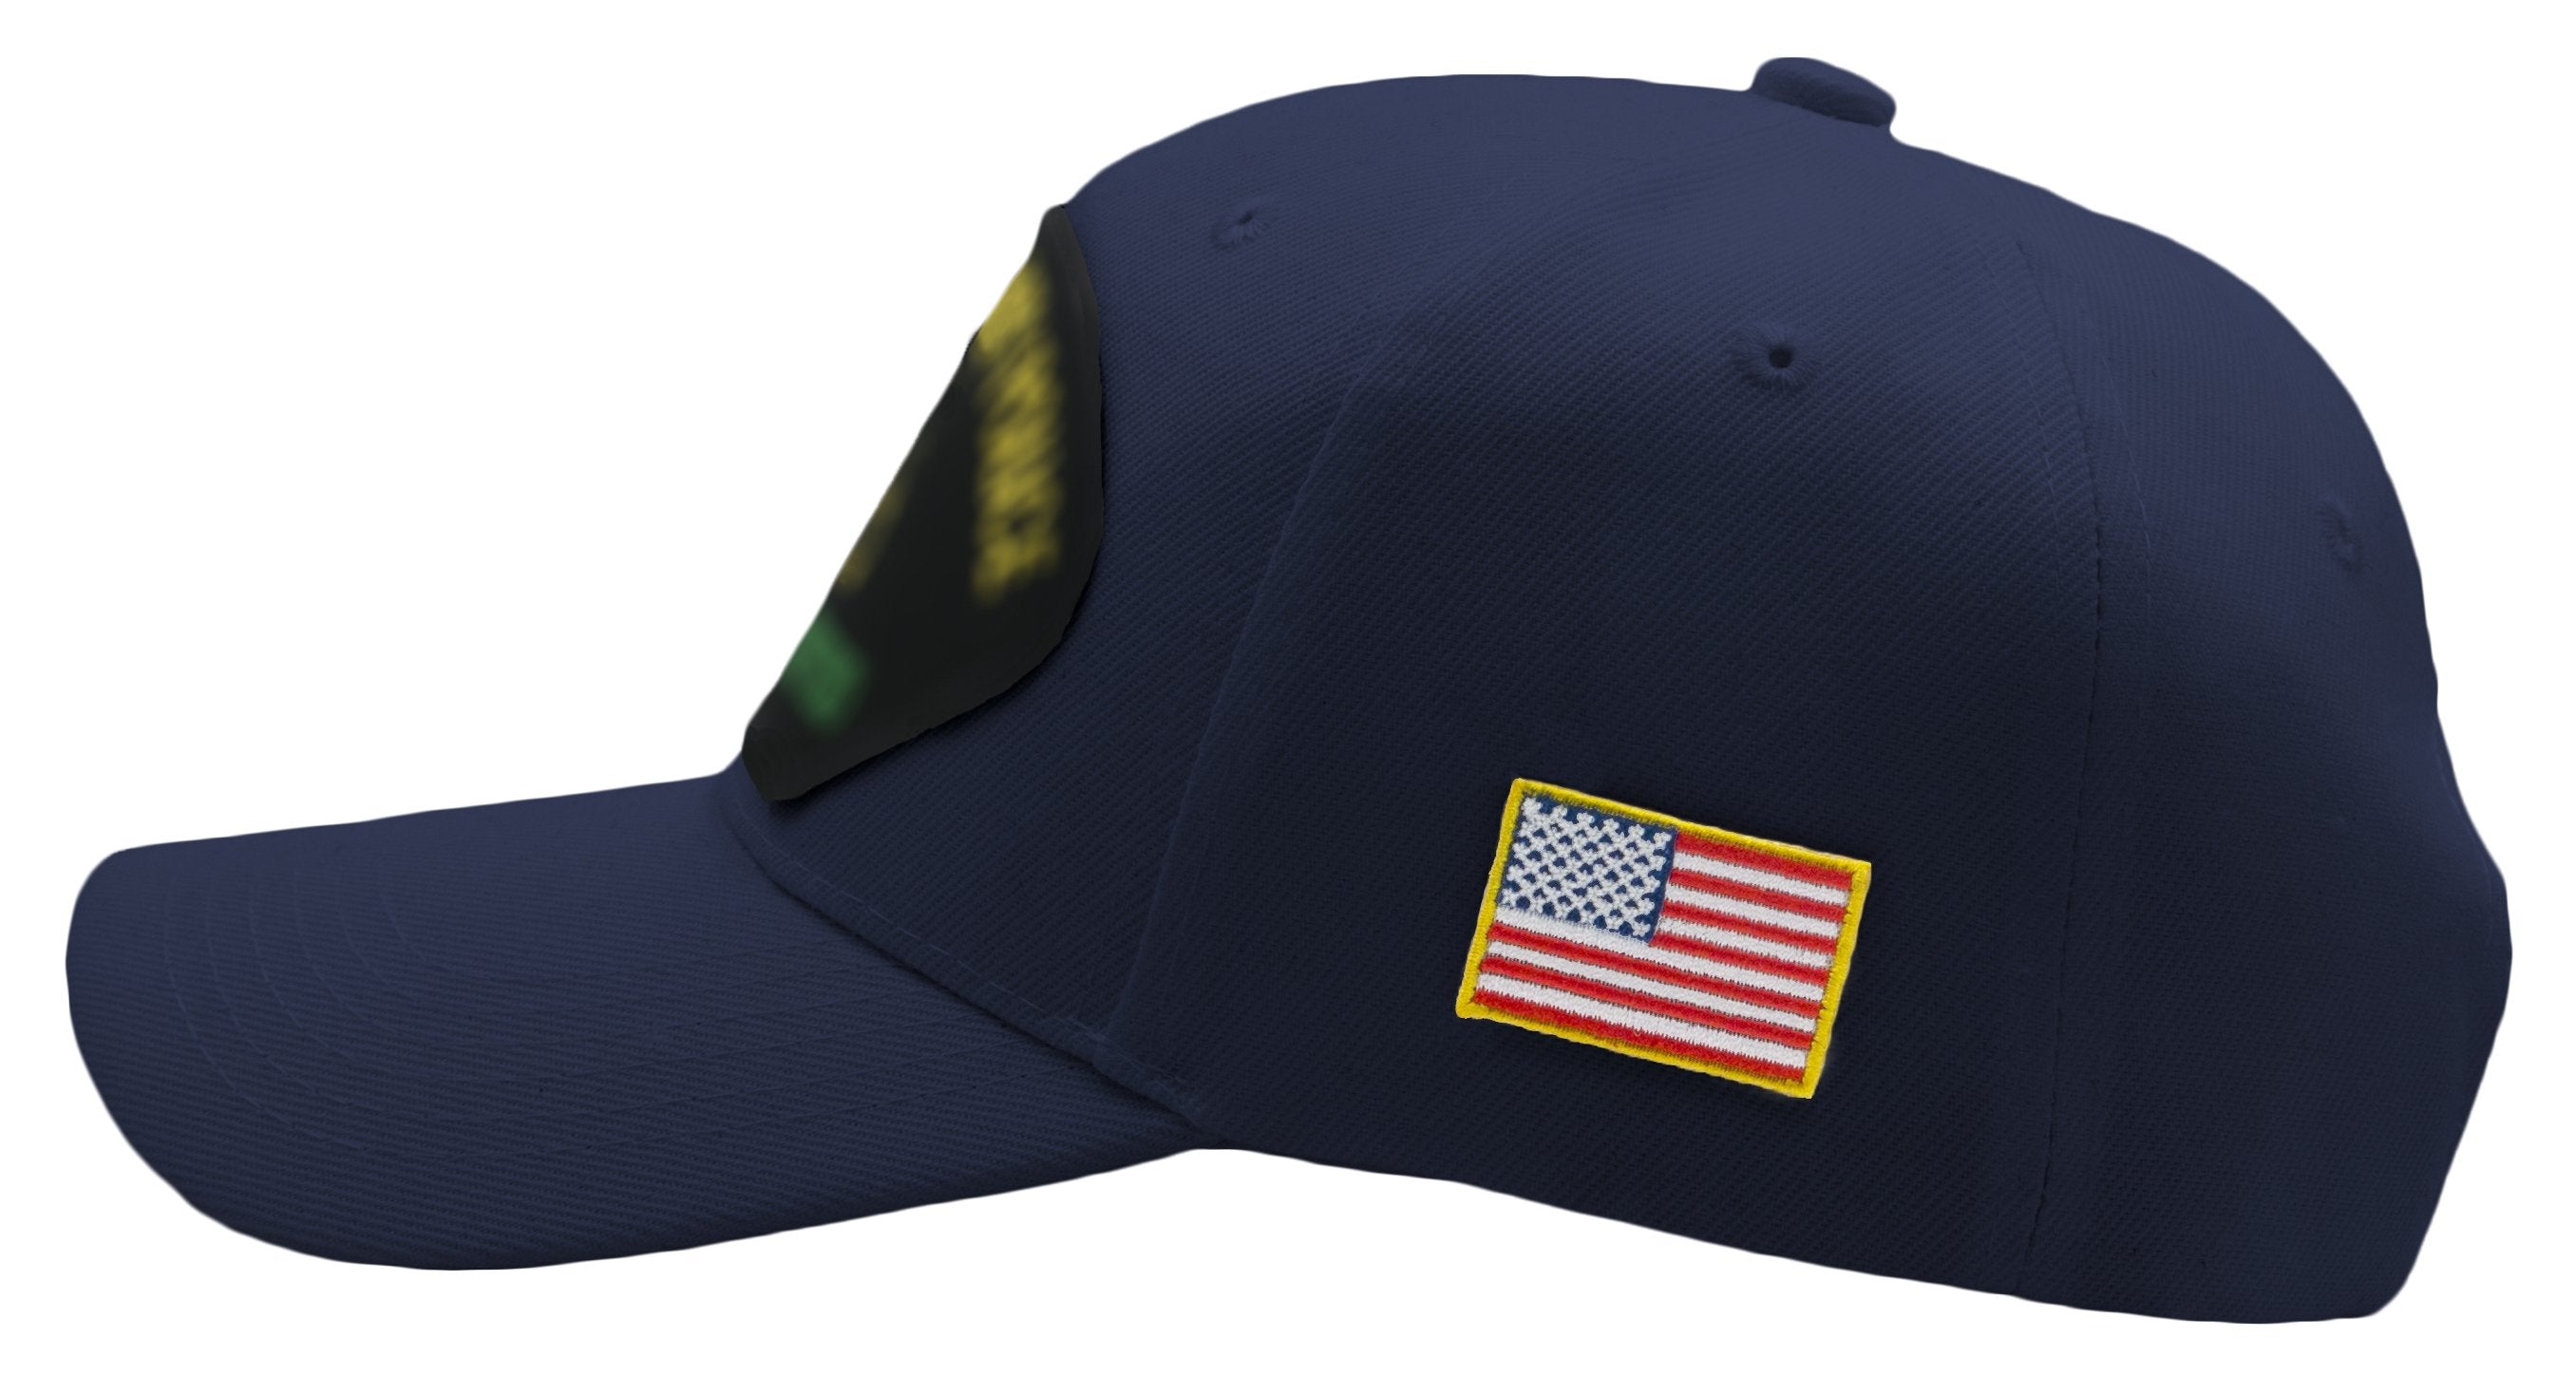 US Navy Grandpa - Proud Grandfather of a US Sailor Hat - Multiple Colors Available